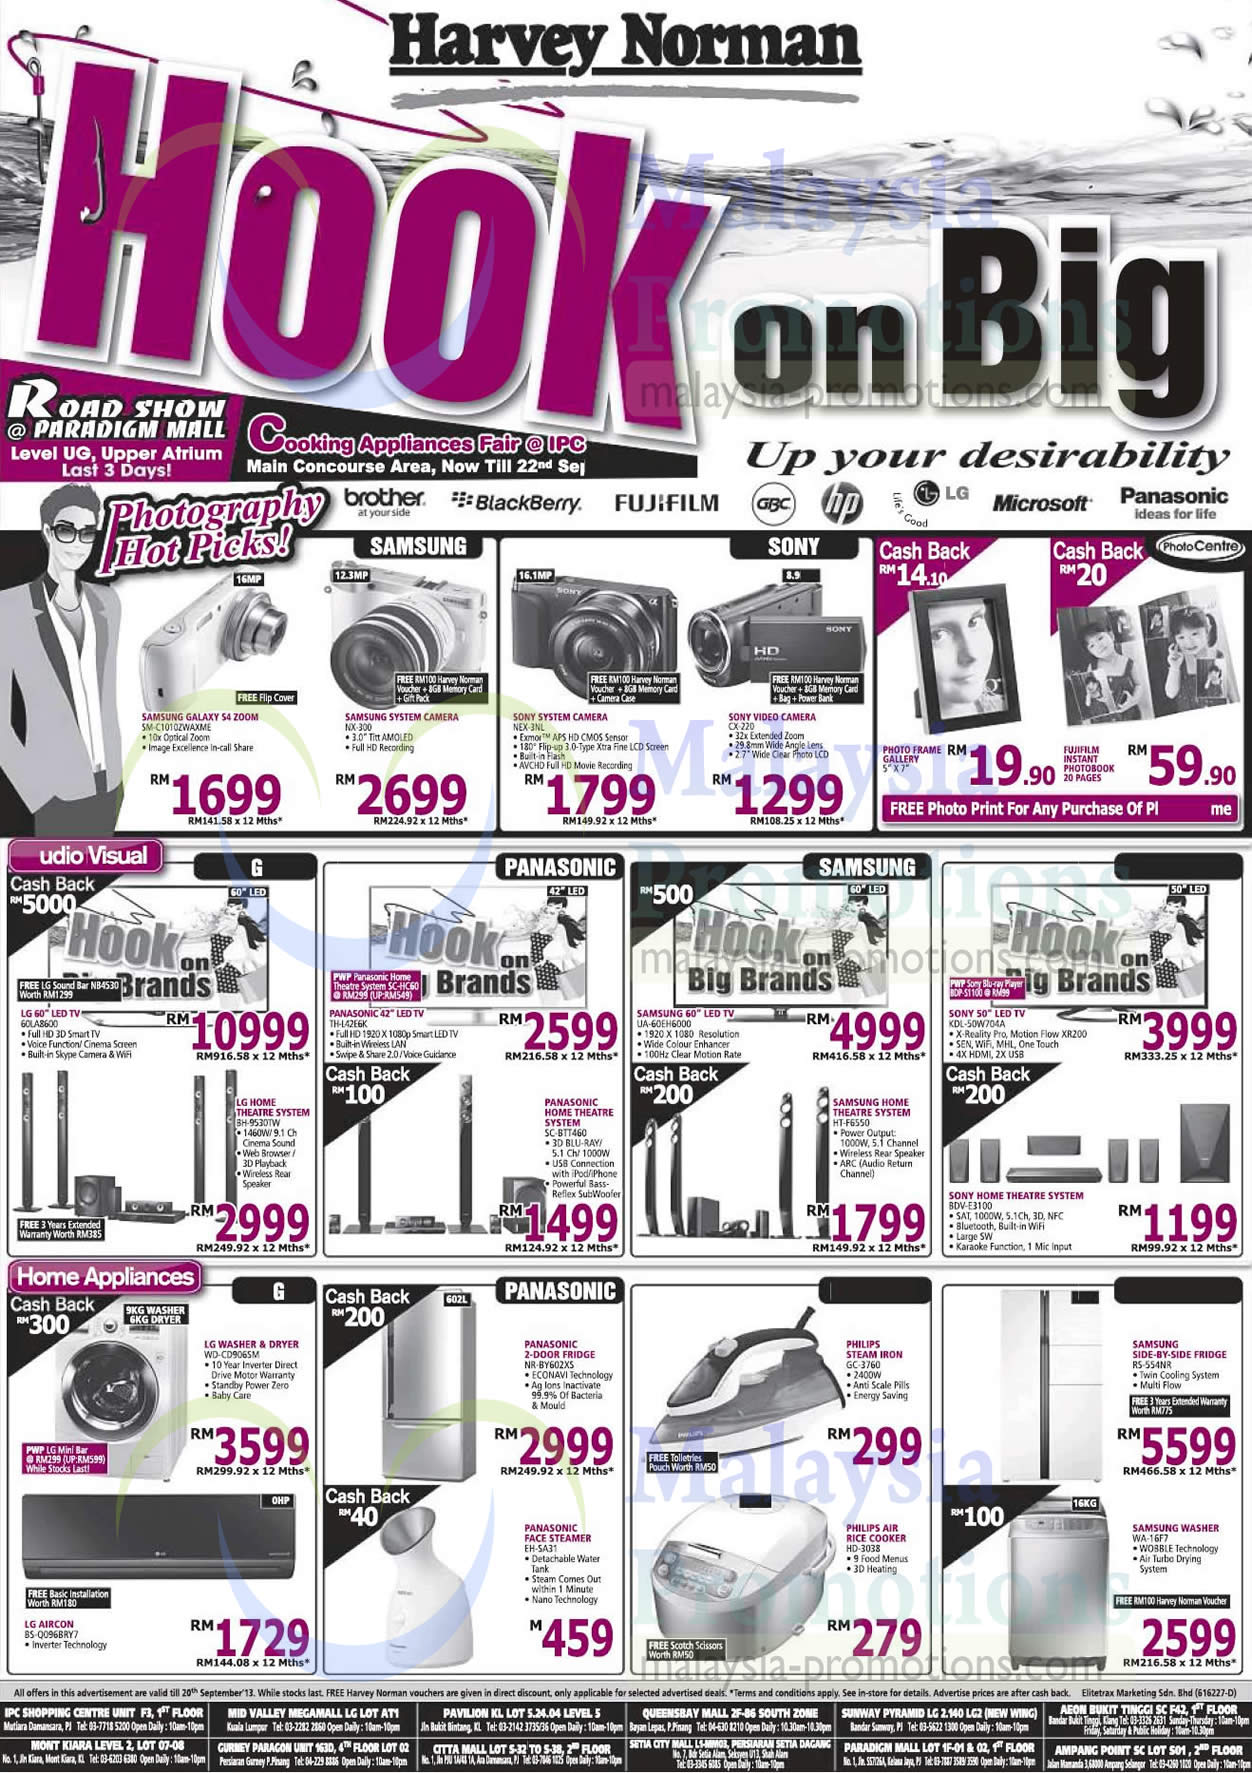 Featured image for Harvey Norman Digital Cameras, Furniture, Notebooks & Appliances Offers 14 - 20 Sep 2013